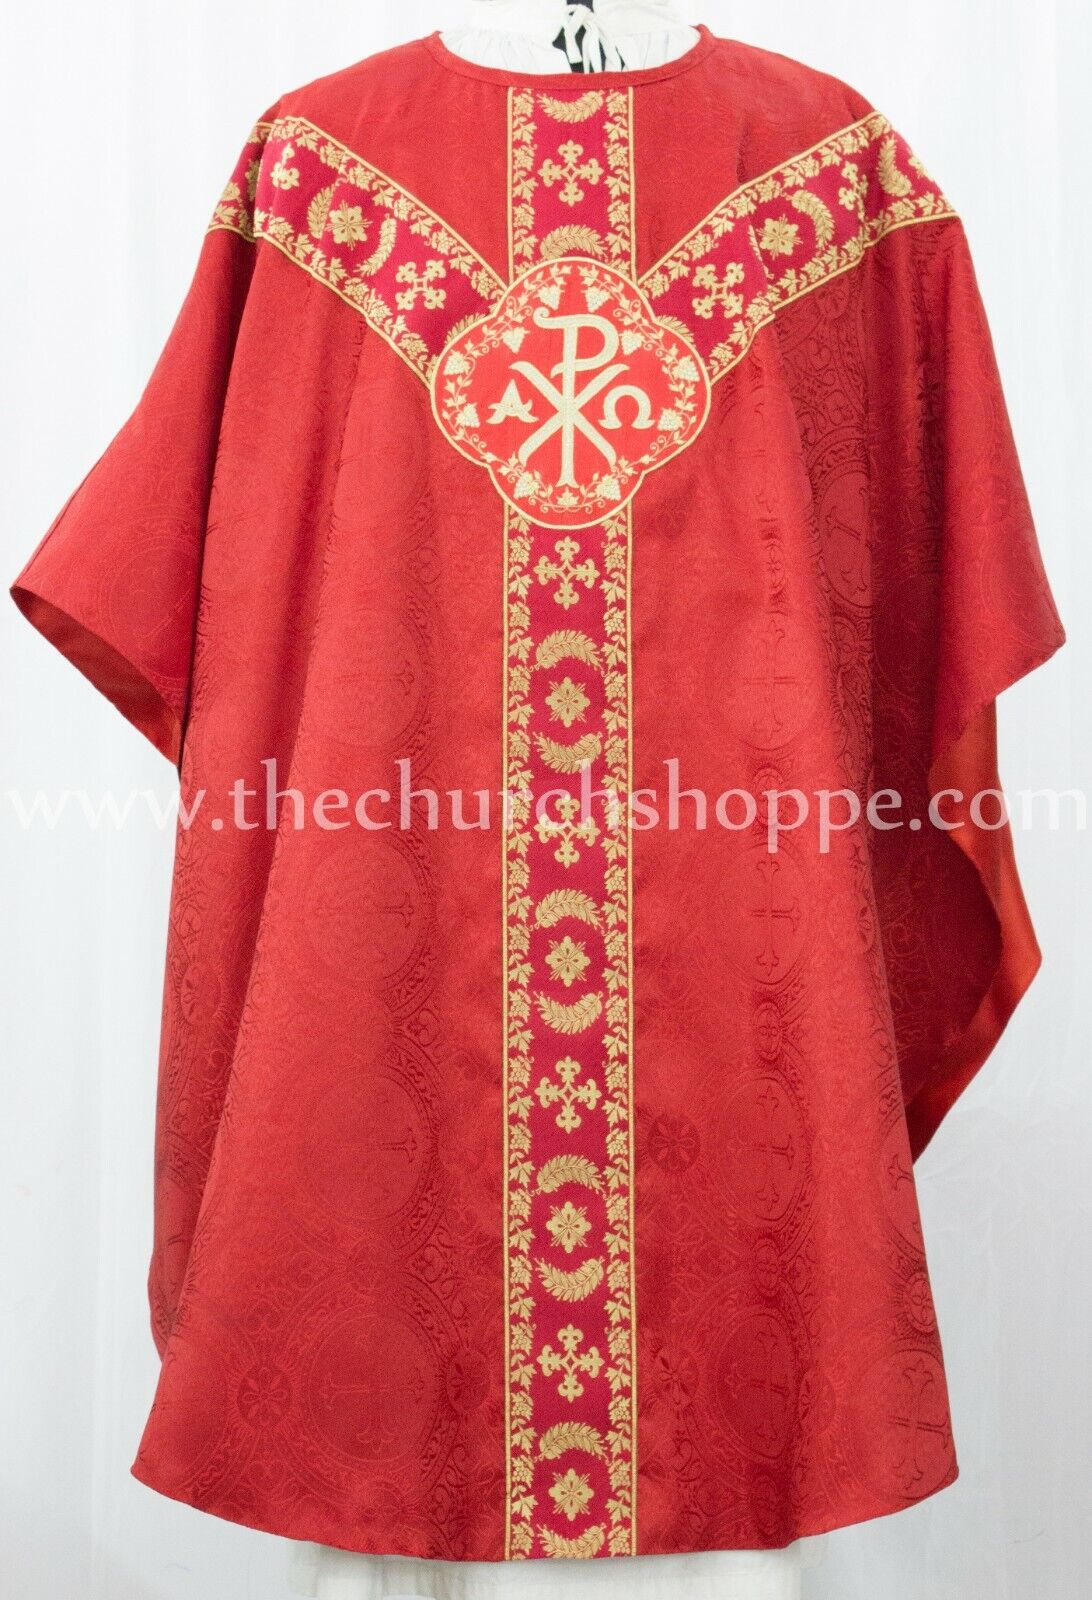 RED GOTHIC CHASUBLE vestment and mass & stole set casula casel casulla, IHS